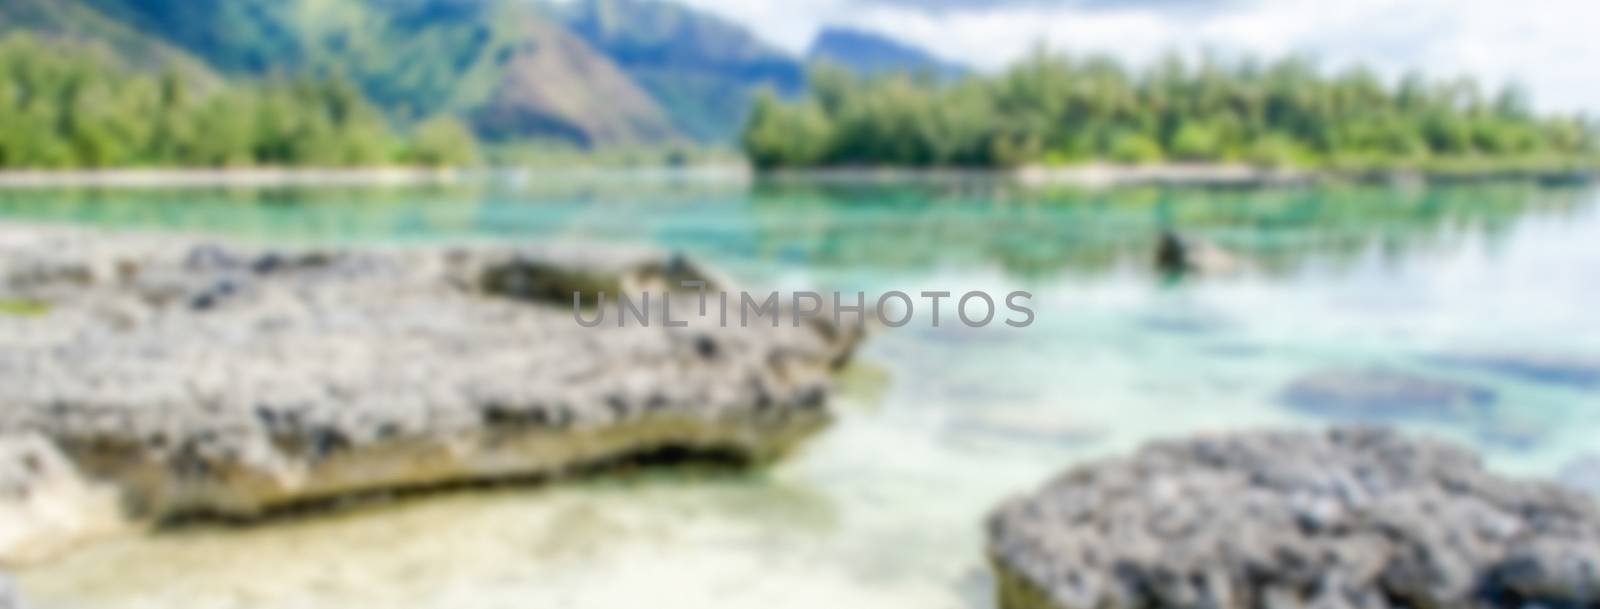 Defocused background of tropical beach in French Polynesia by marcorubino